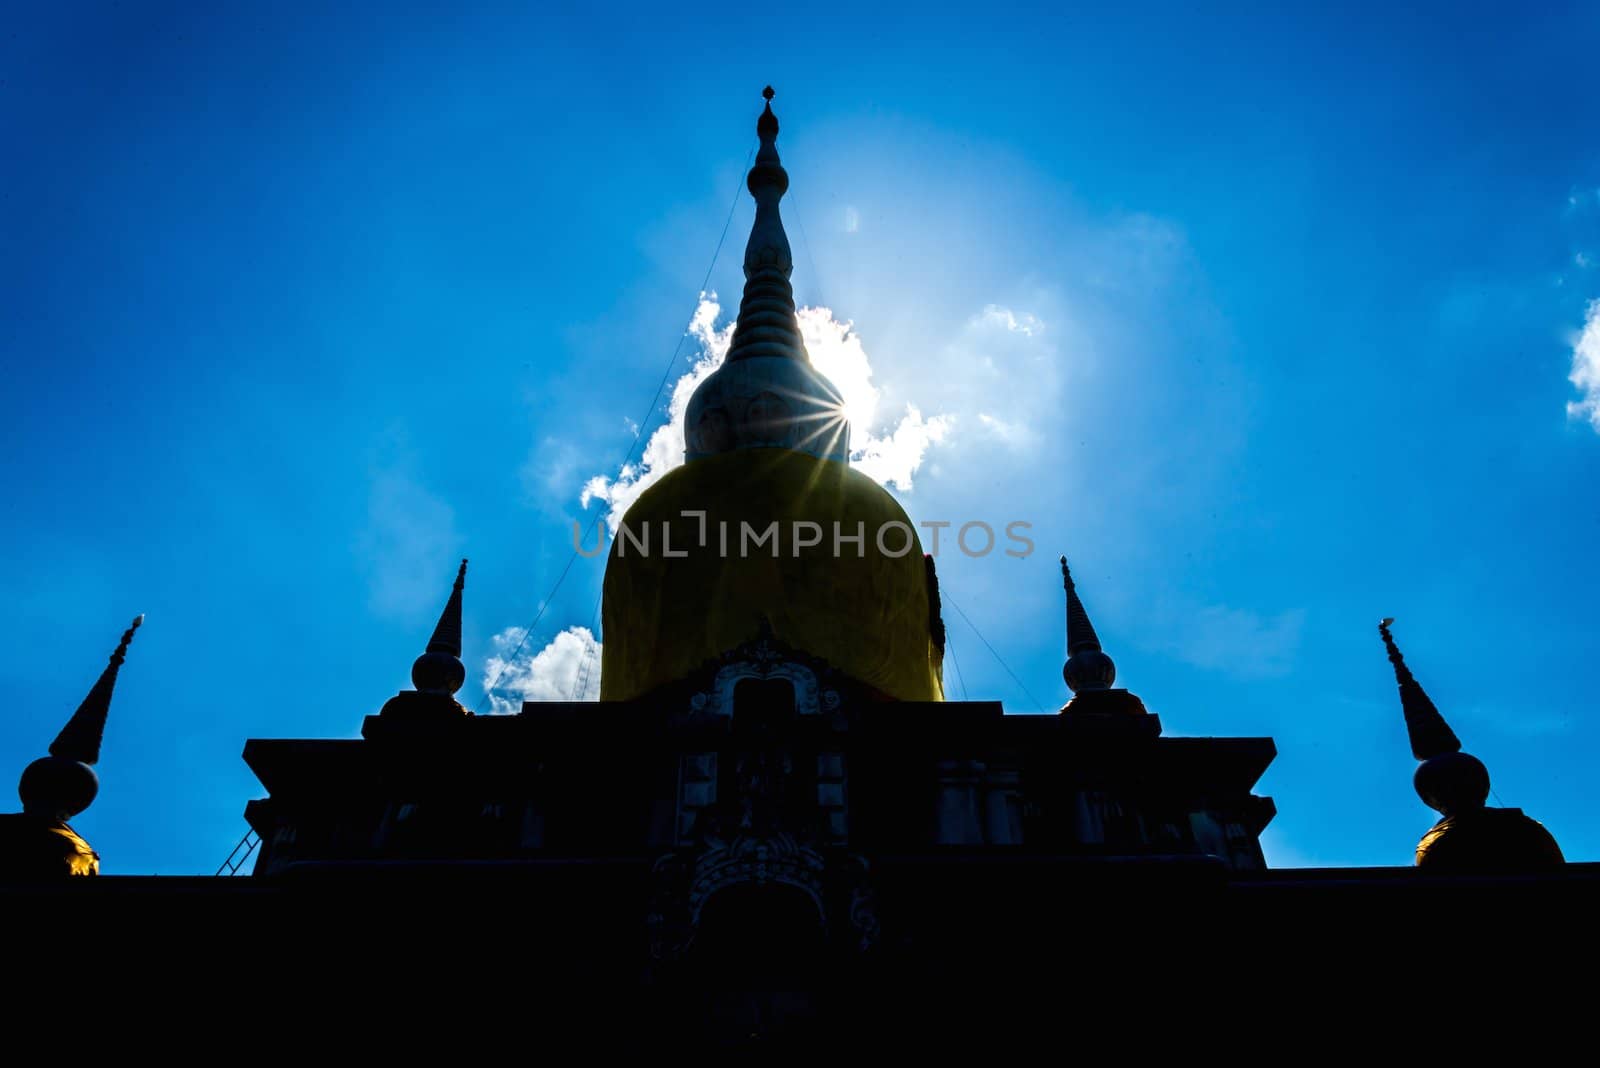 Silhouette Buddha's relics in Thailand, Name is phra tard na dun by wmitrmatr